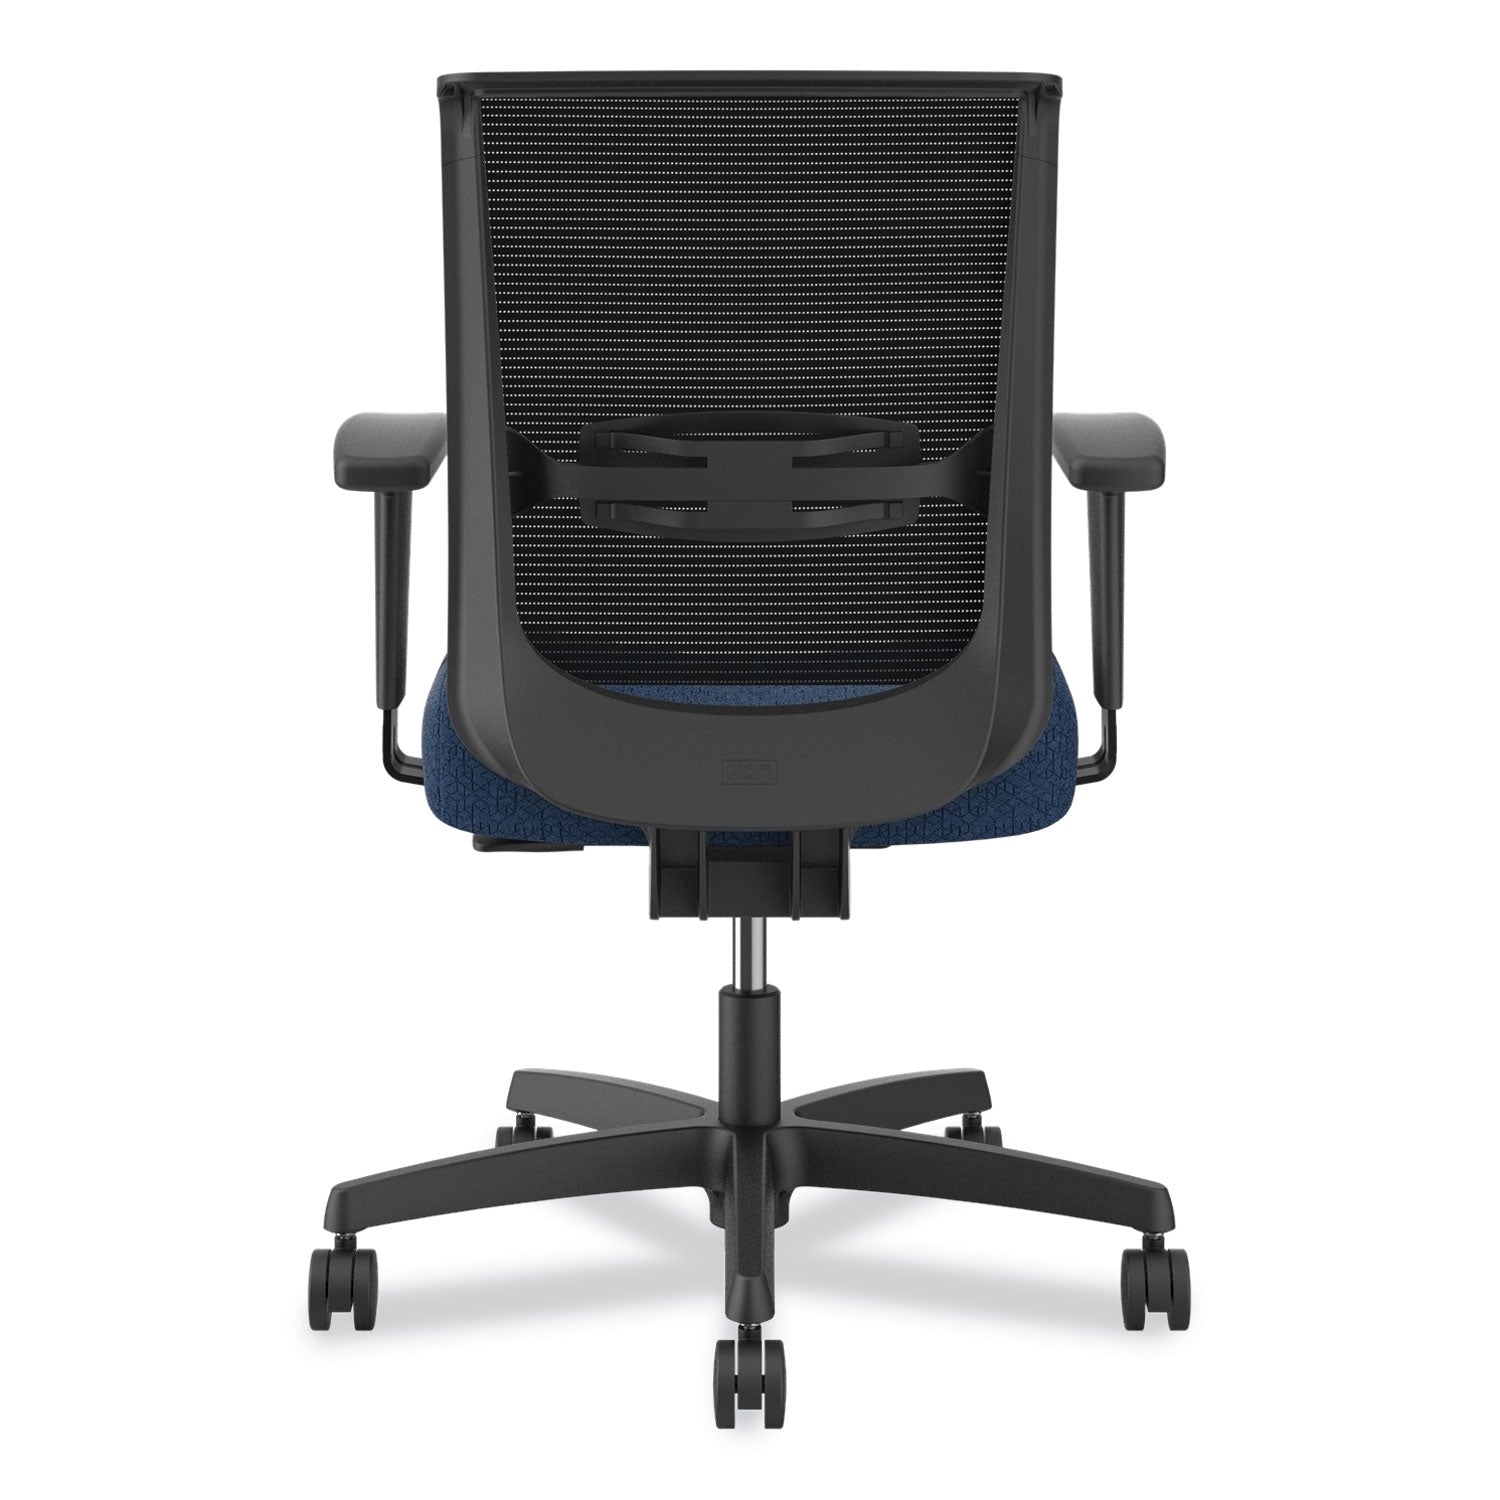 convergence-mid-back-task-chair-up-to-275lb-165-to-21-seat-ht-navy-seat-black-back-frame-ships-in-7-10-bus-days_honcmy1aapx13 - 4